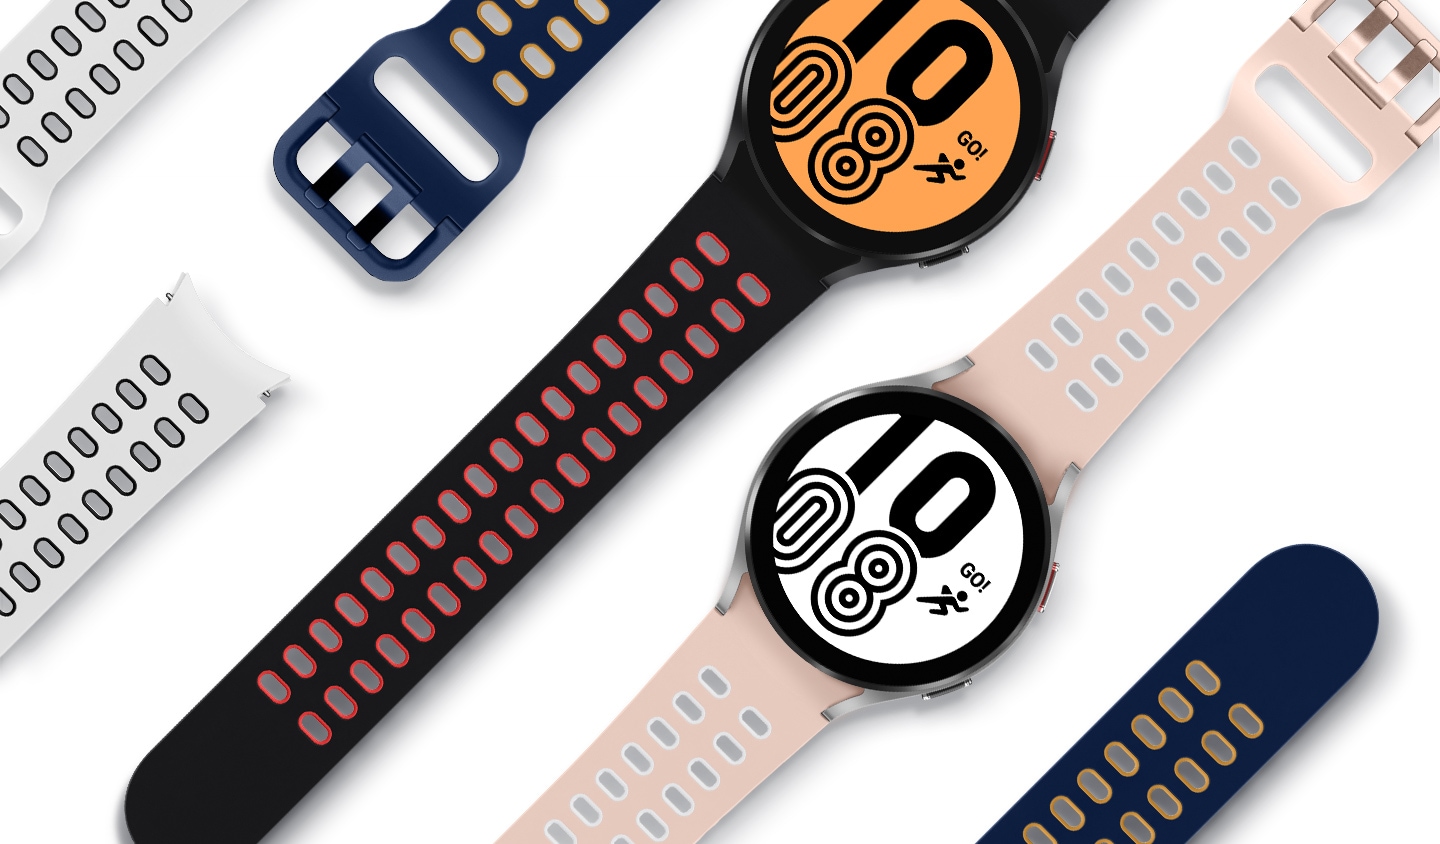 Two Galaxy Watch4 devices are laid straight, each attached with an Extreme Sport Band. Several other Extreme Sport Bands are shown beside the watch devices. The bands are in different colors, including white, black, navy, and pink.